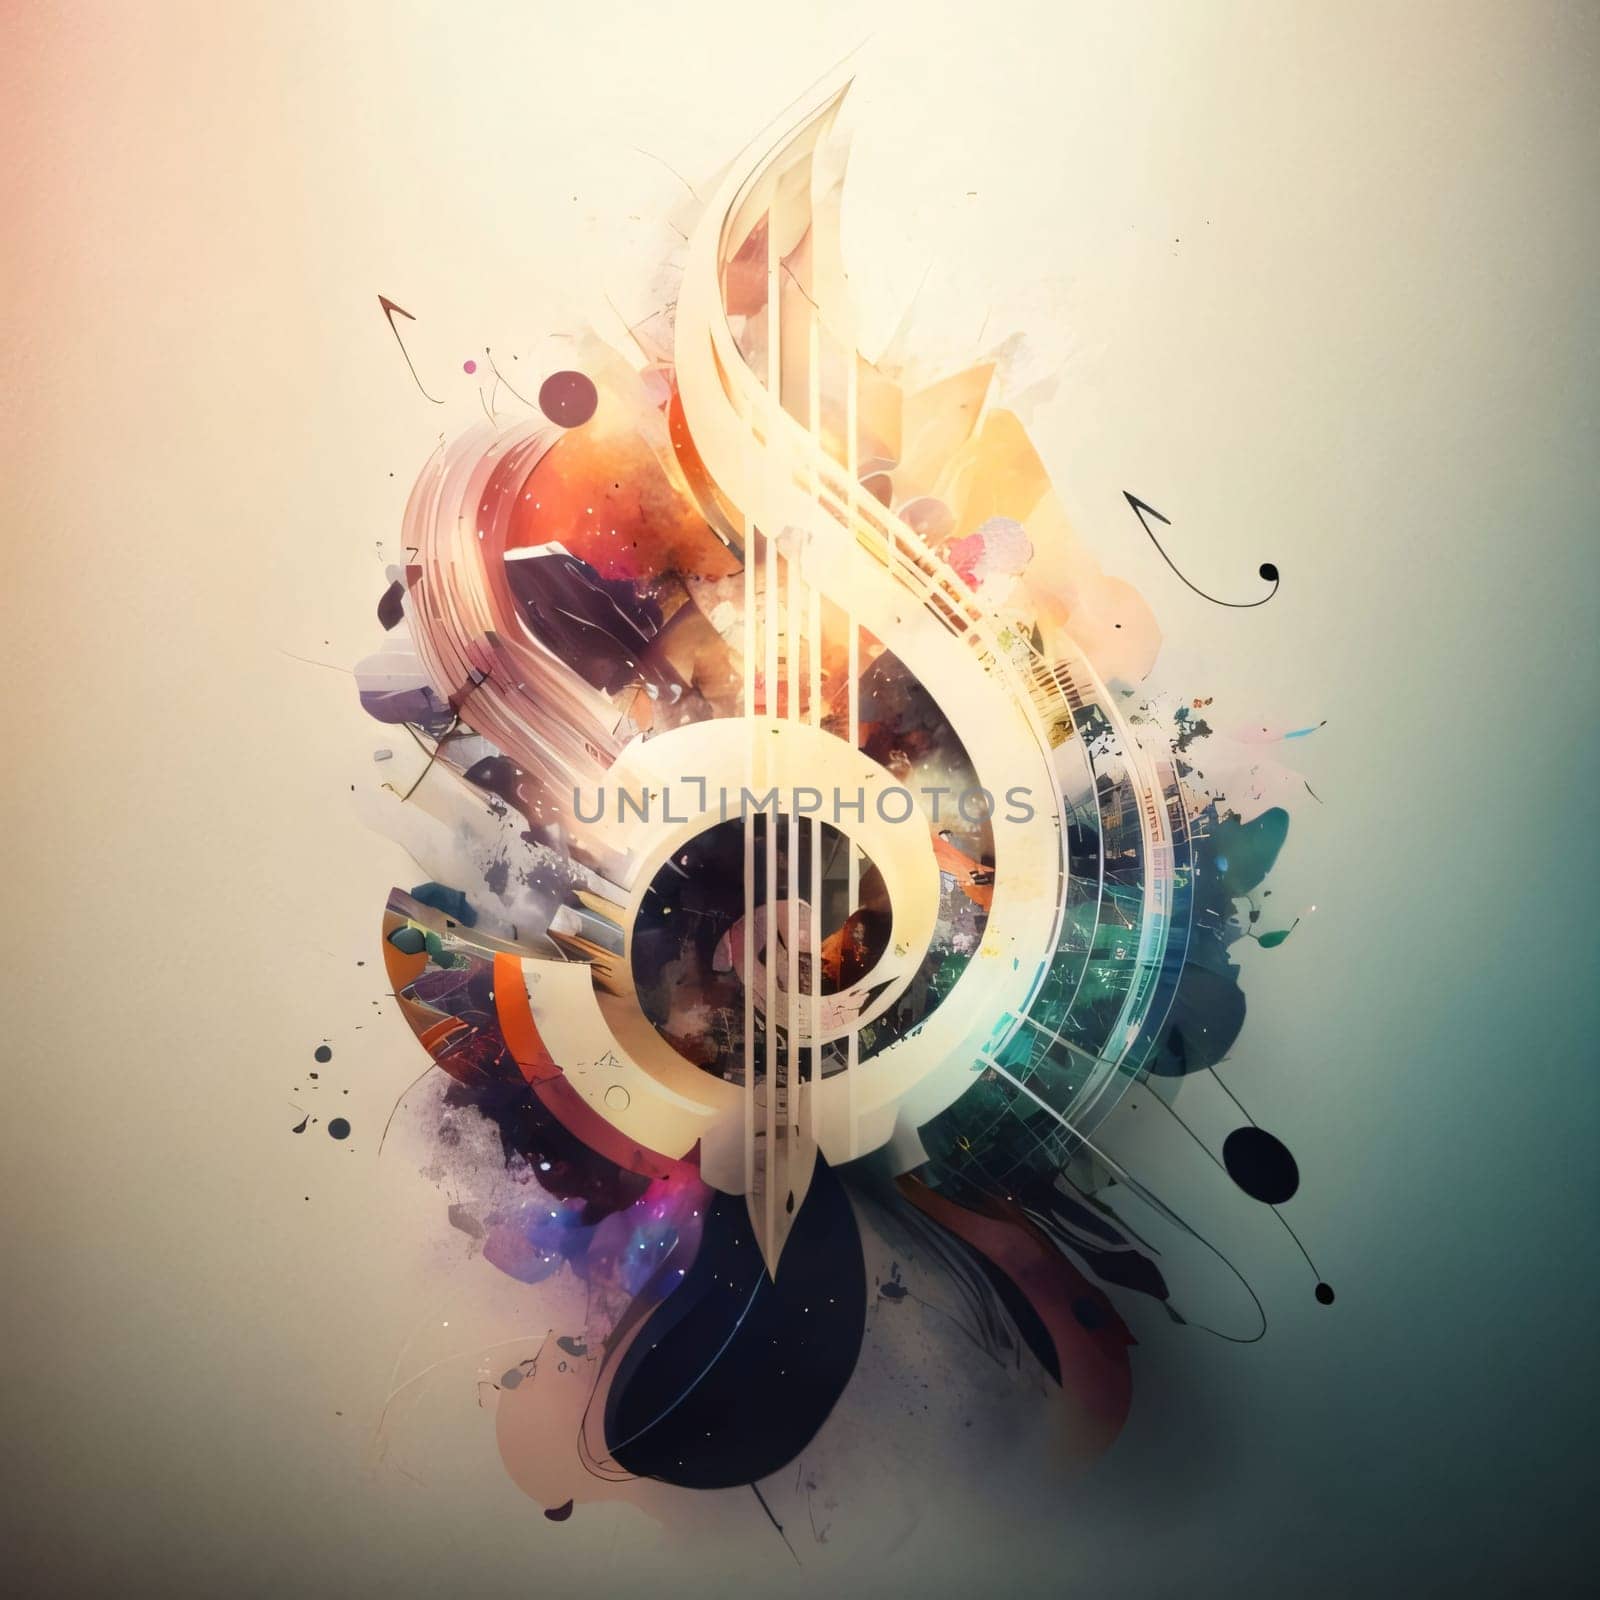 Abstract background design: Colorful music notes on grunge background with space for your text